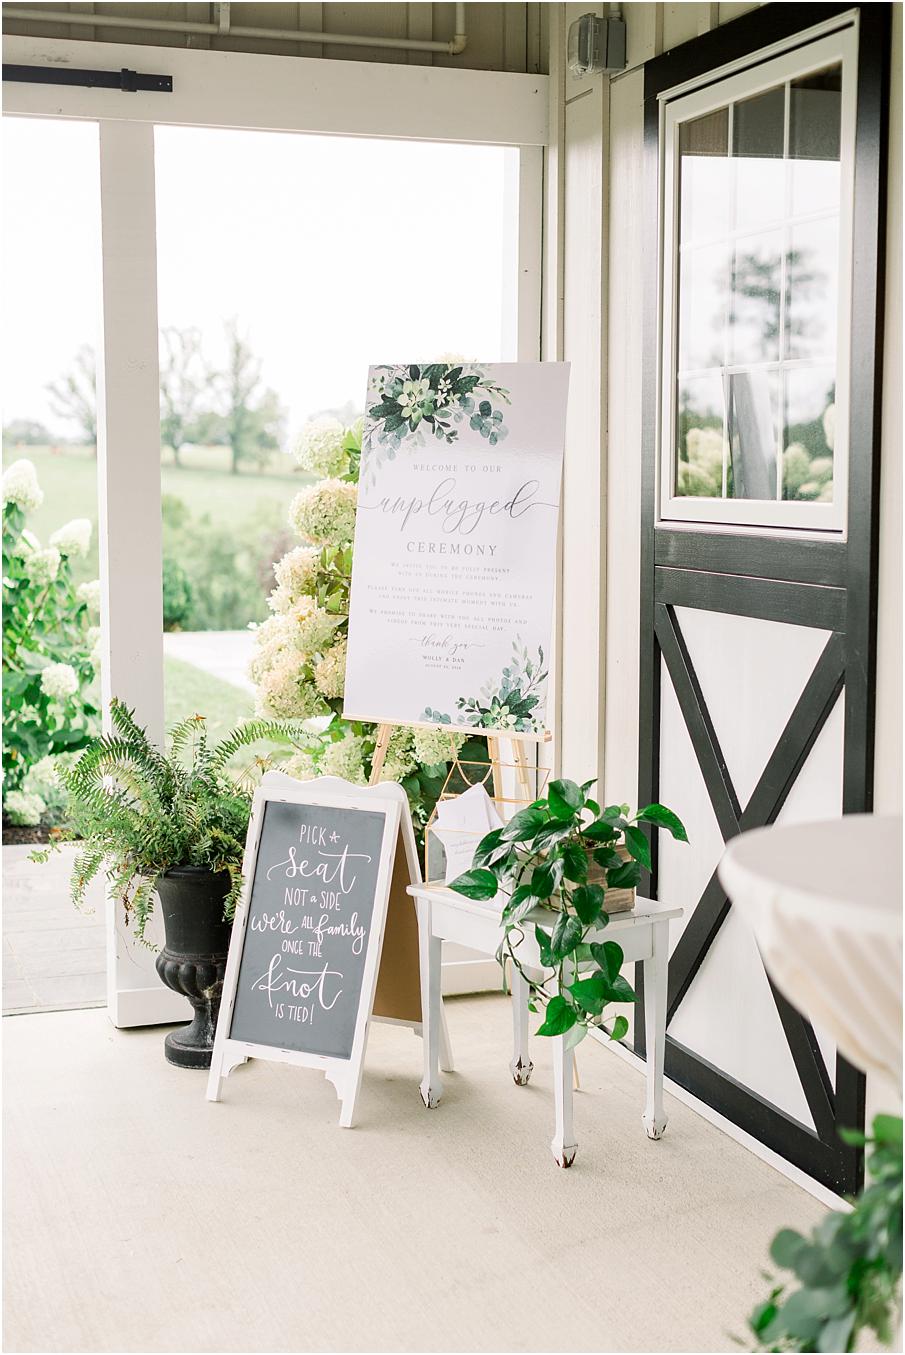 Unplugged ceremony sign and decorations at Shadow Creek Weddings and Events wedding venue